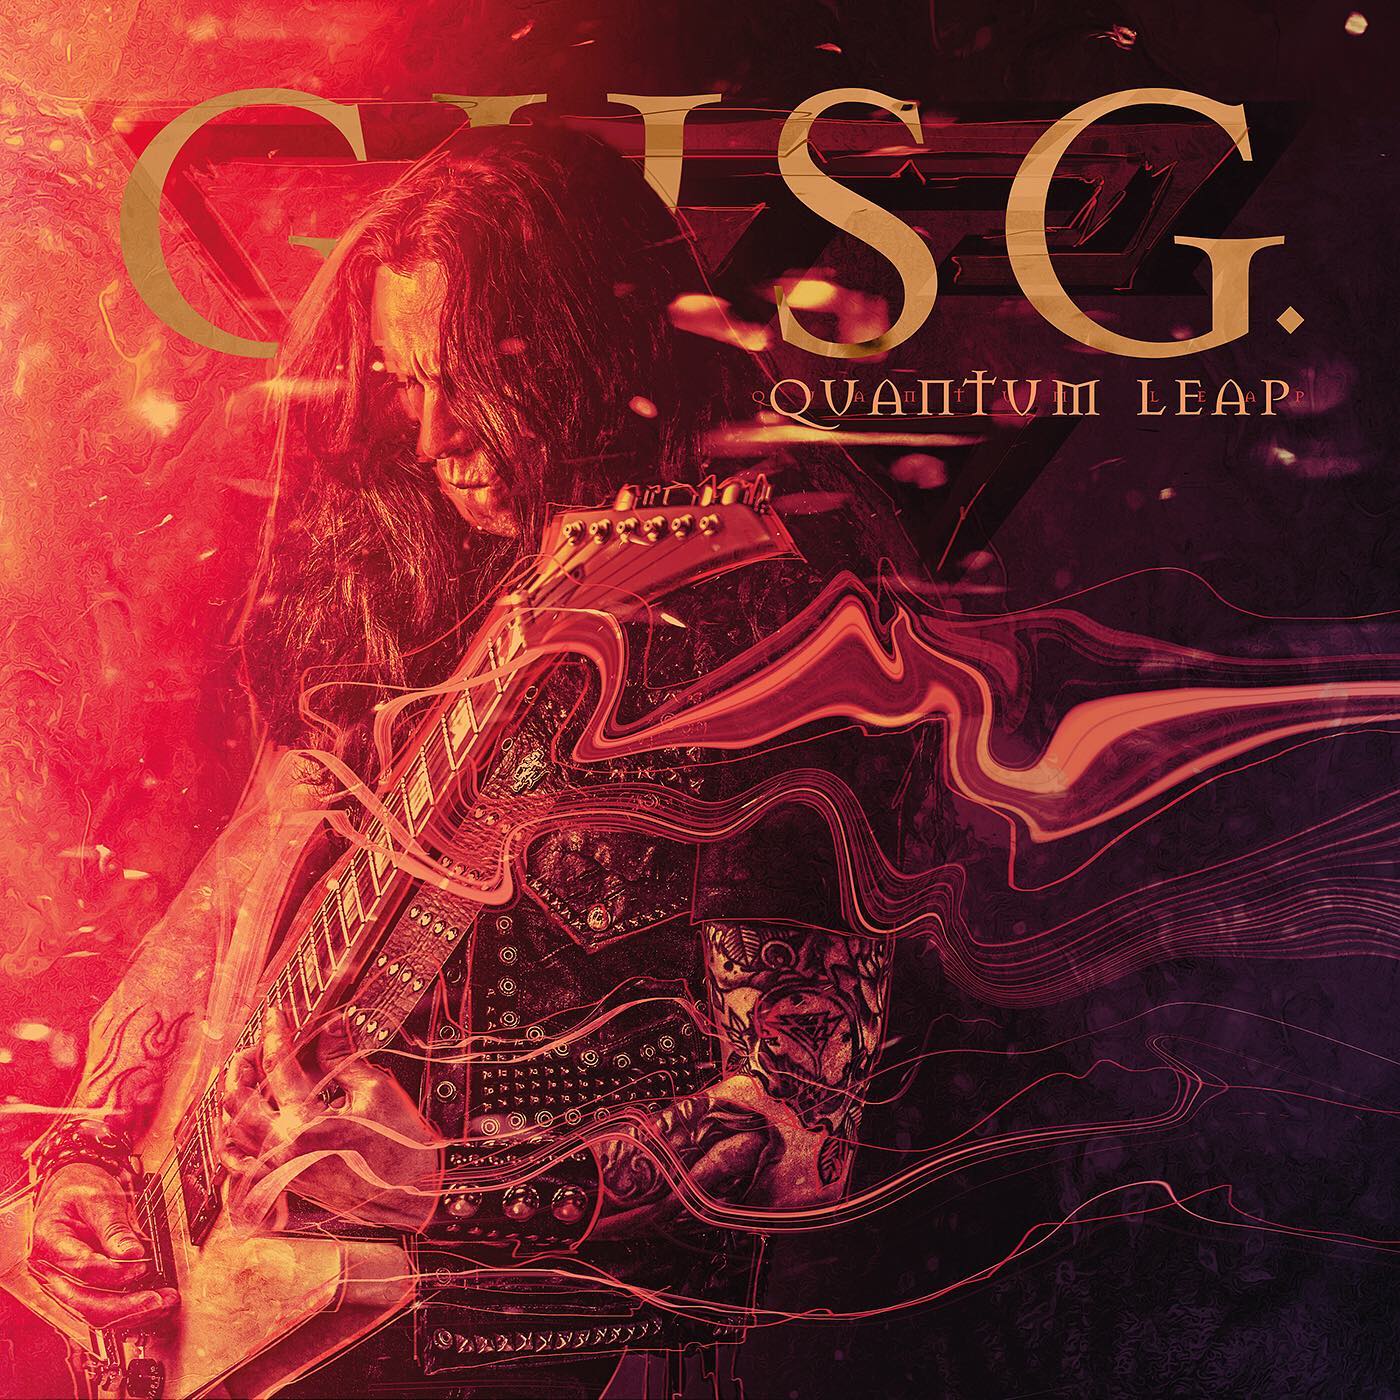 NY VIDEO: Gus G - Into The Unknown 1